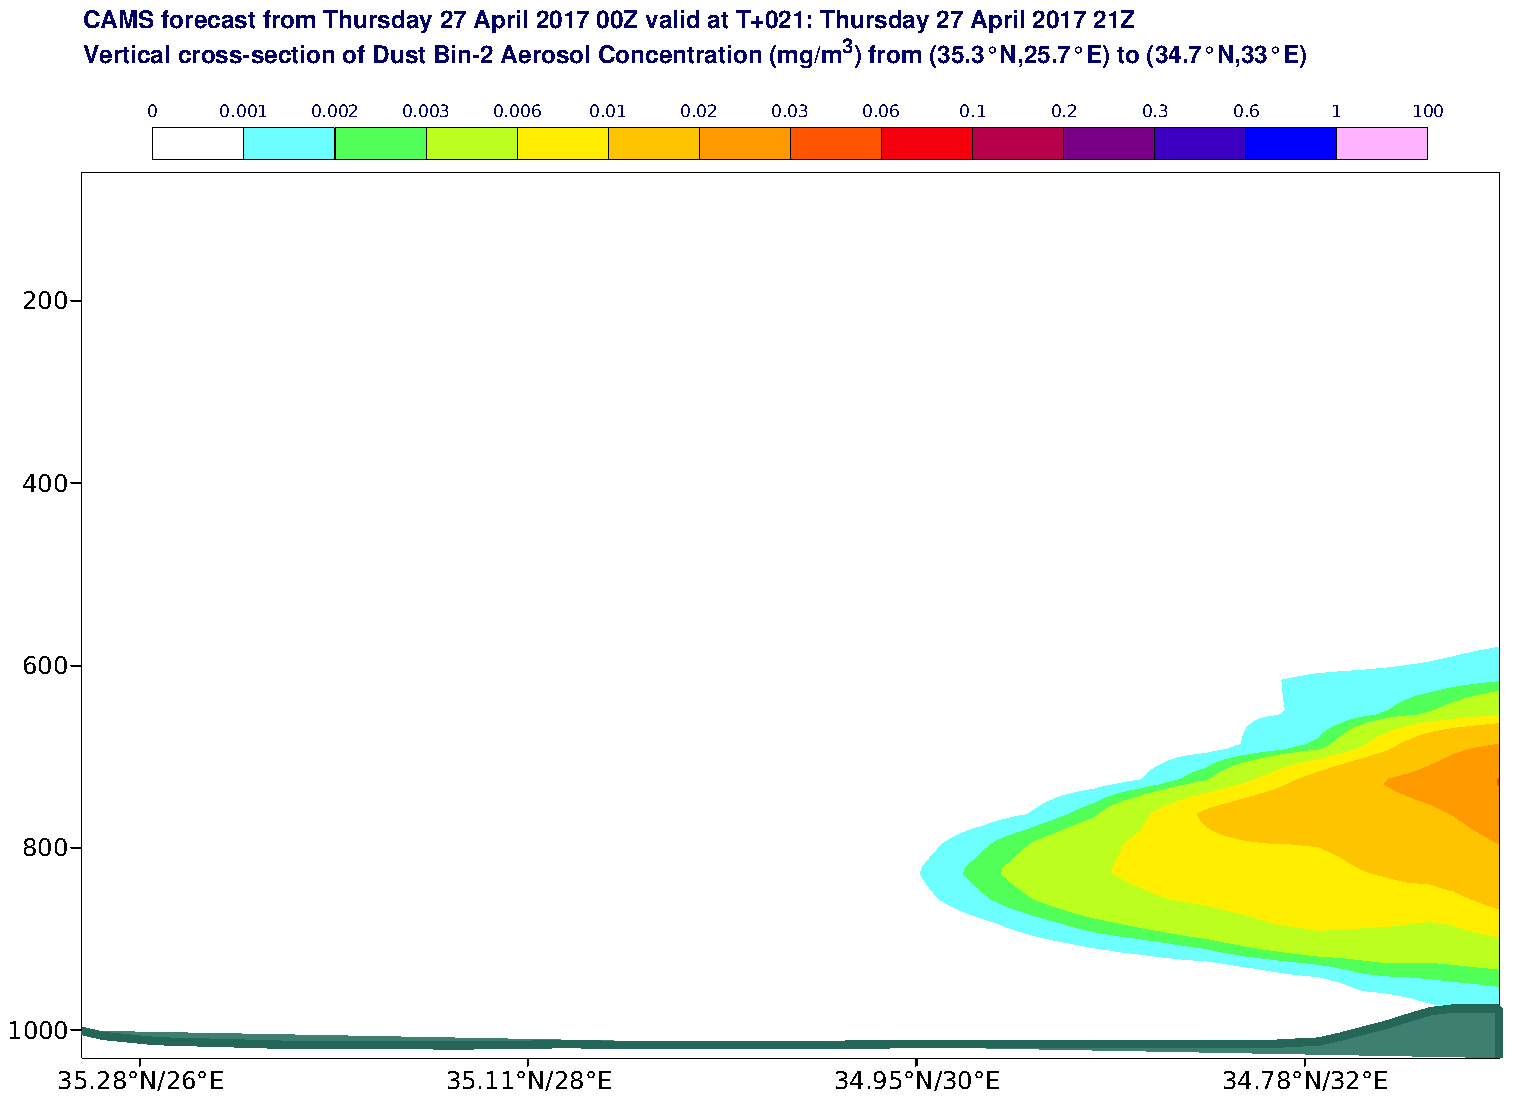 Vertical cross-section of Dust Bin-2 Aerosol Concentration (mg/m3) valid at T21 - 2017-04-27 21:00